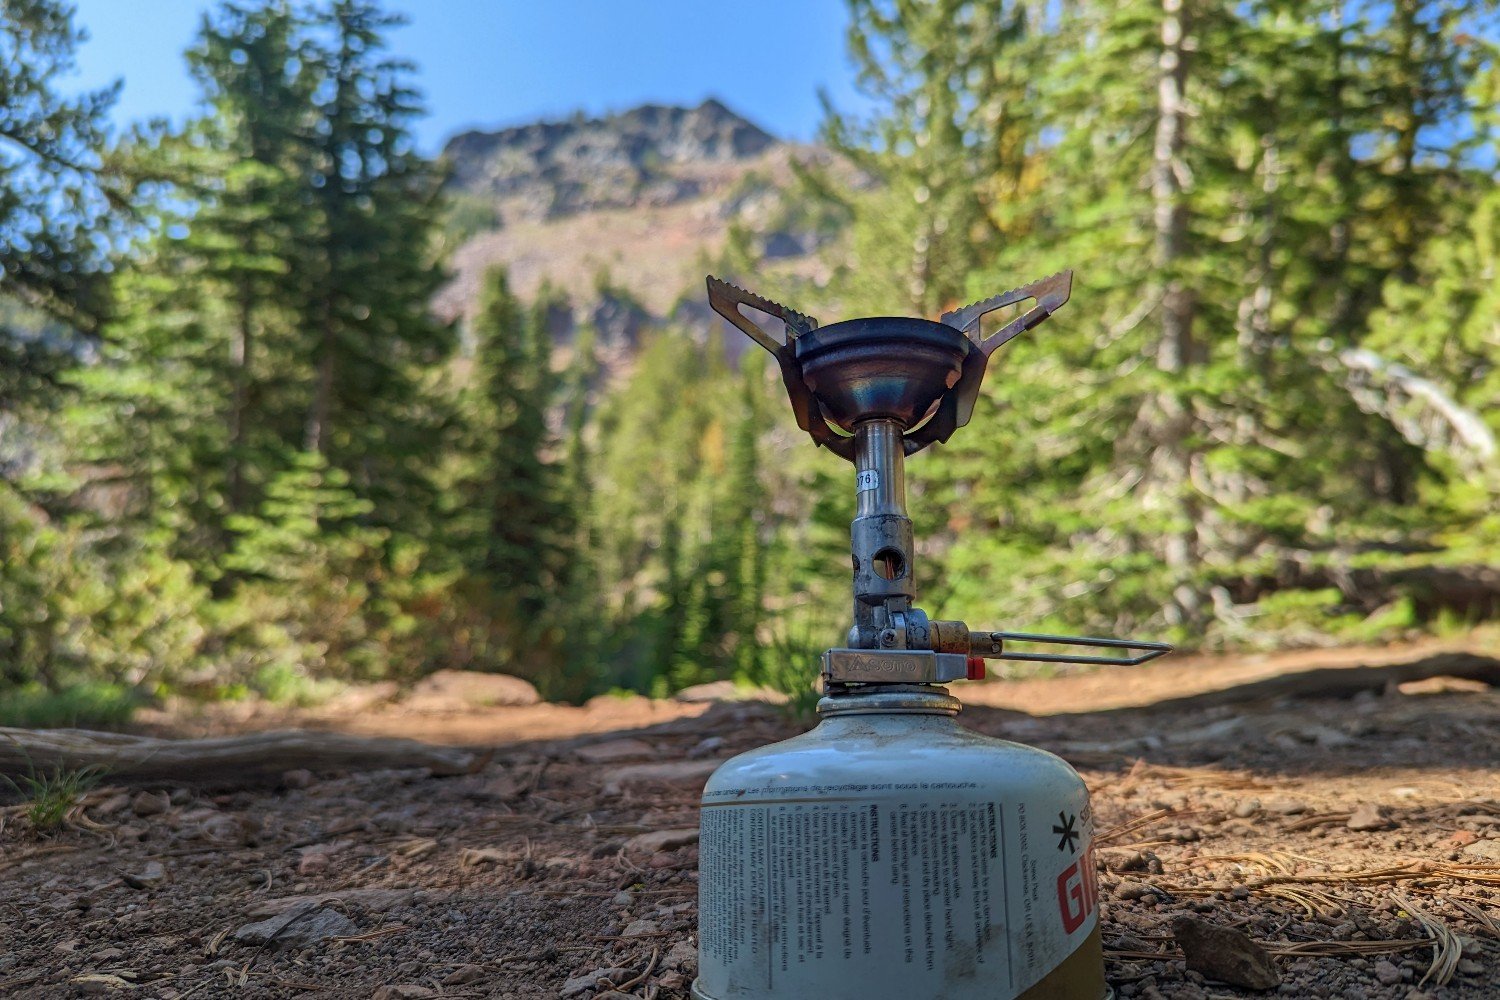 The SOTO Windmaster stove with TriFlex pot support attached to a fuel canister - its a wooded campsite scene with a rocky mountain in the background